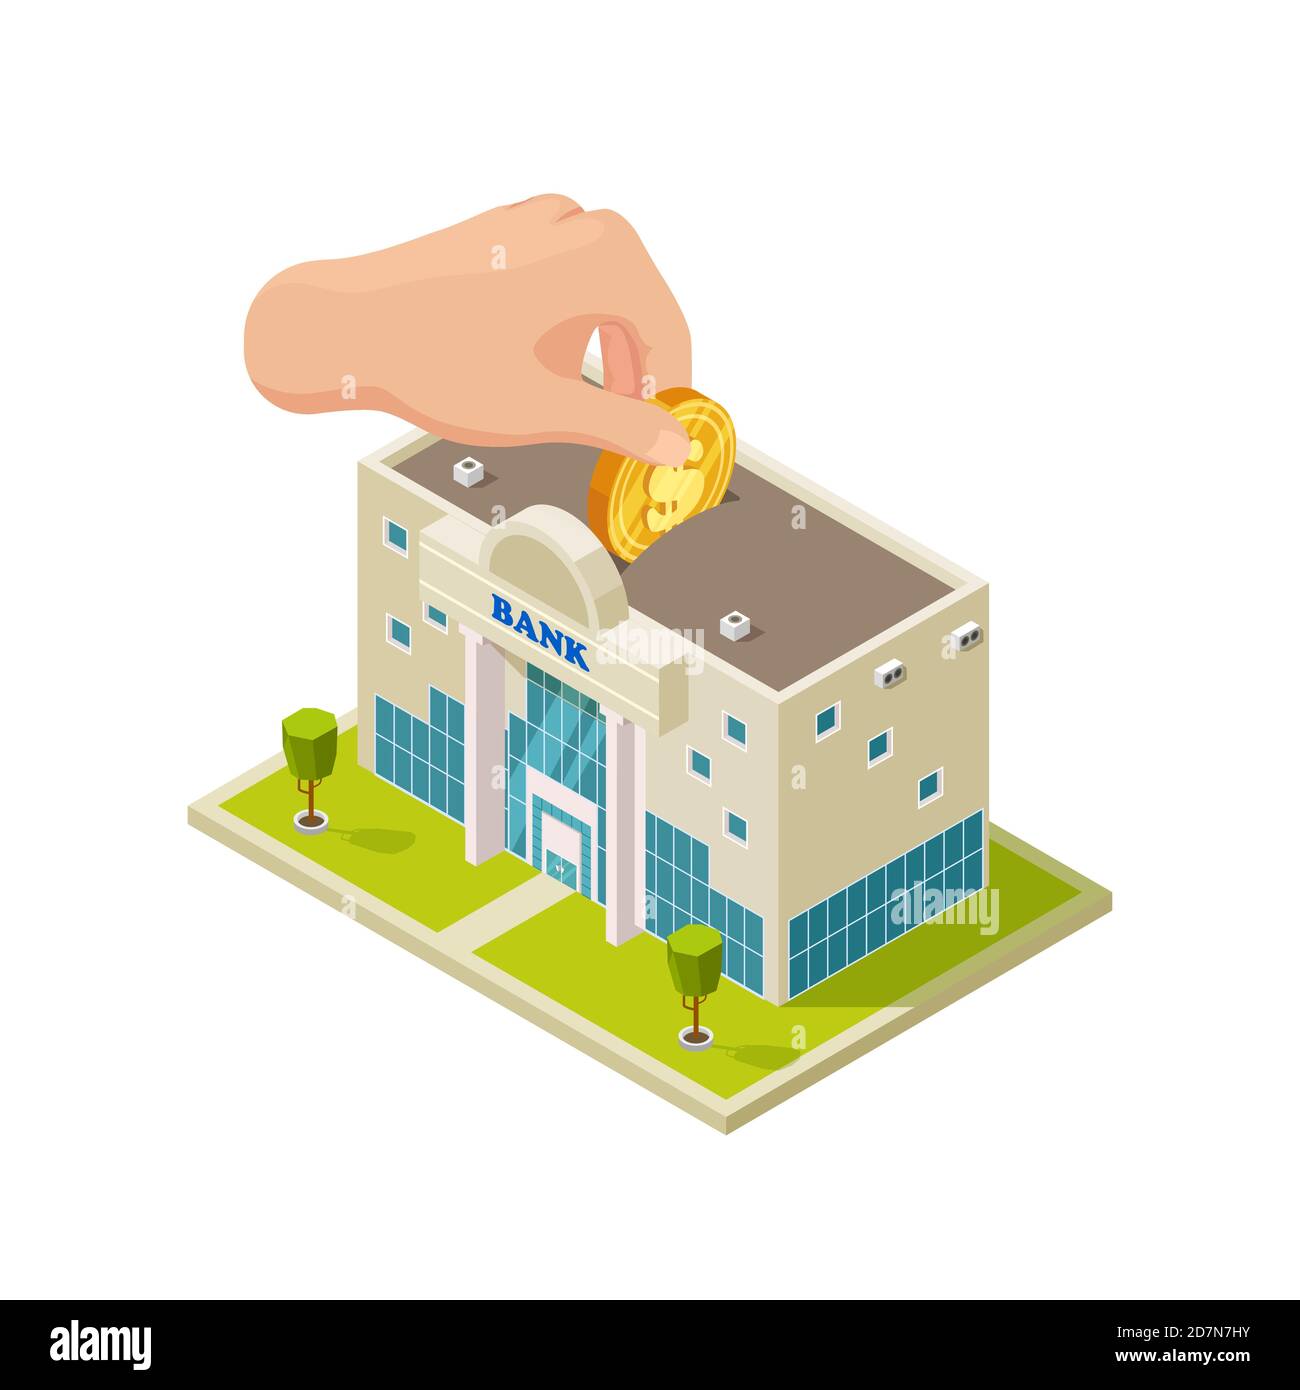 Saving money in bank isometric vector concept. Illustration of finance bank isometric, business financial Stock Vector